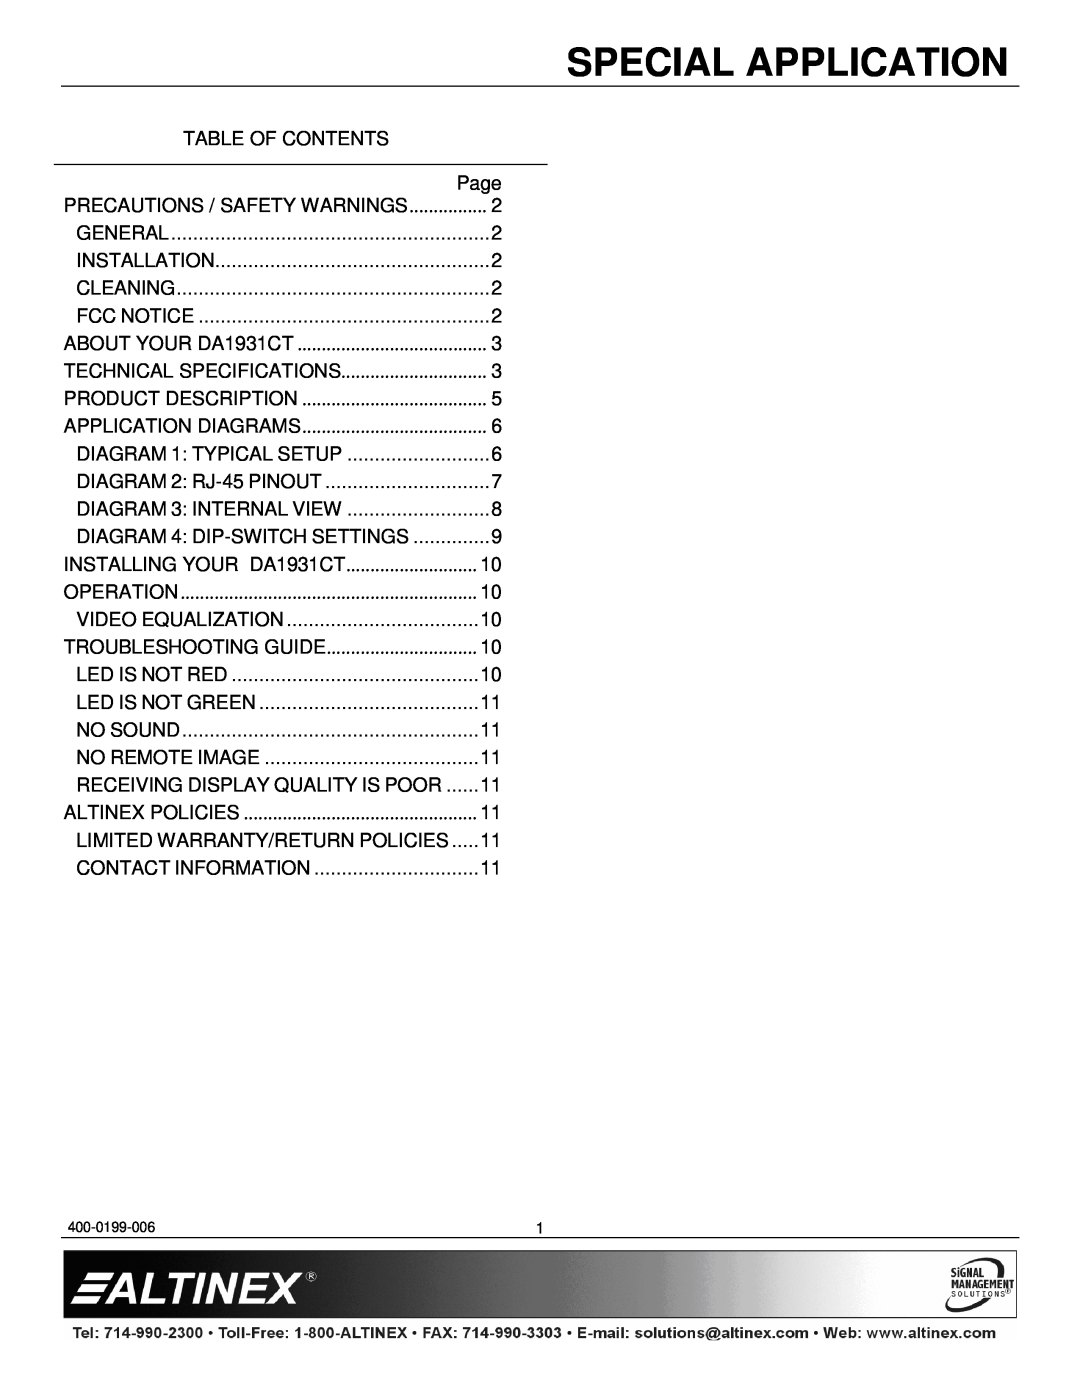 Altinex DA1931CT manual Special Application, Table Of Contents 